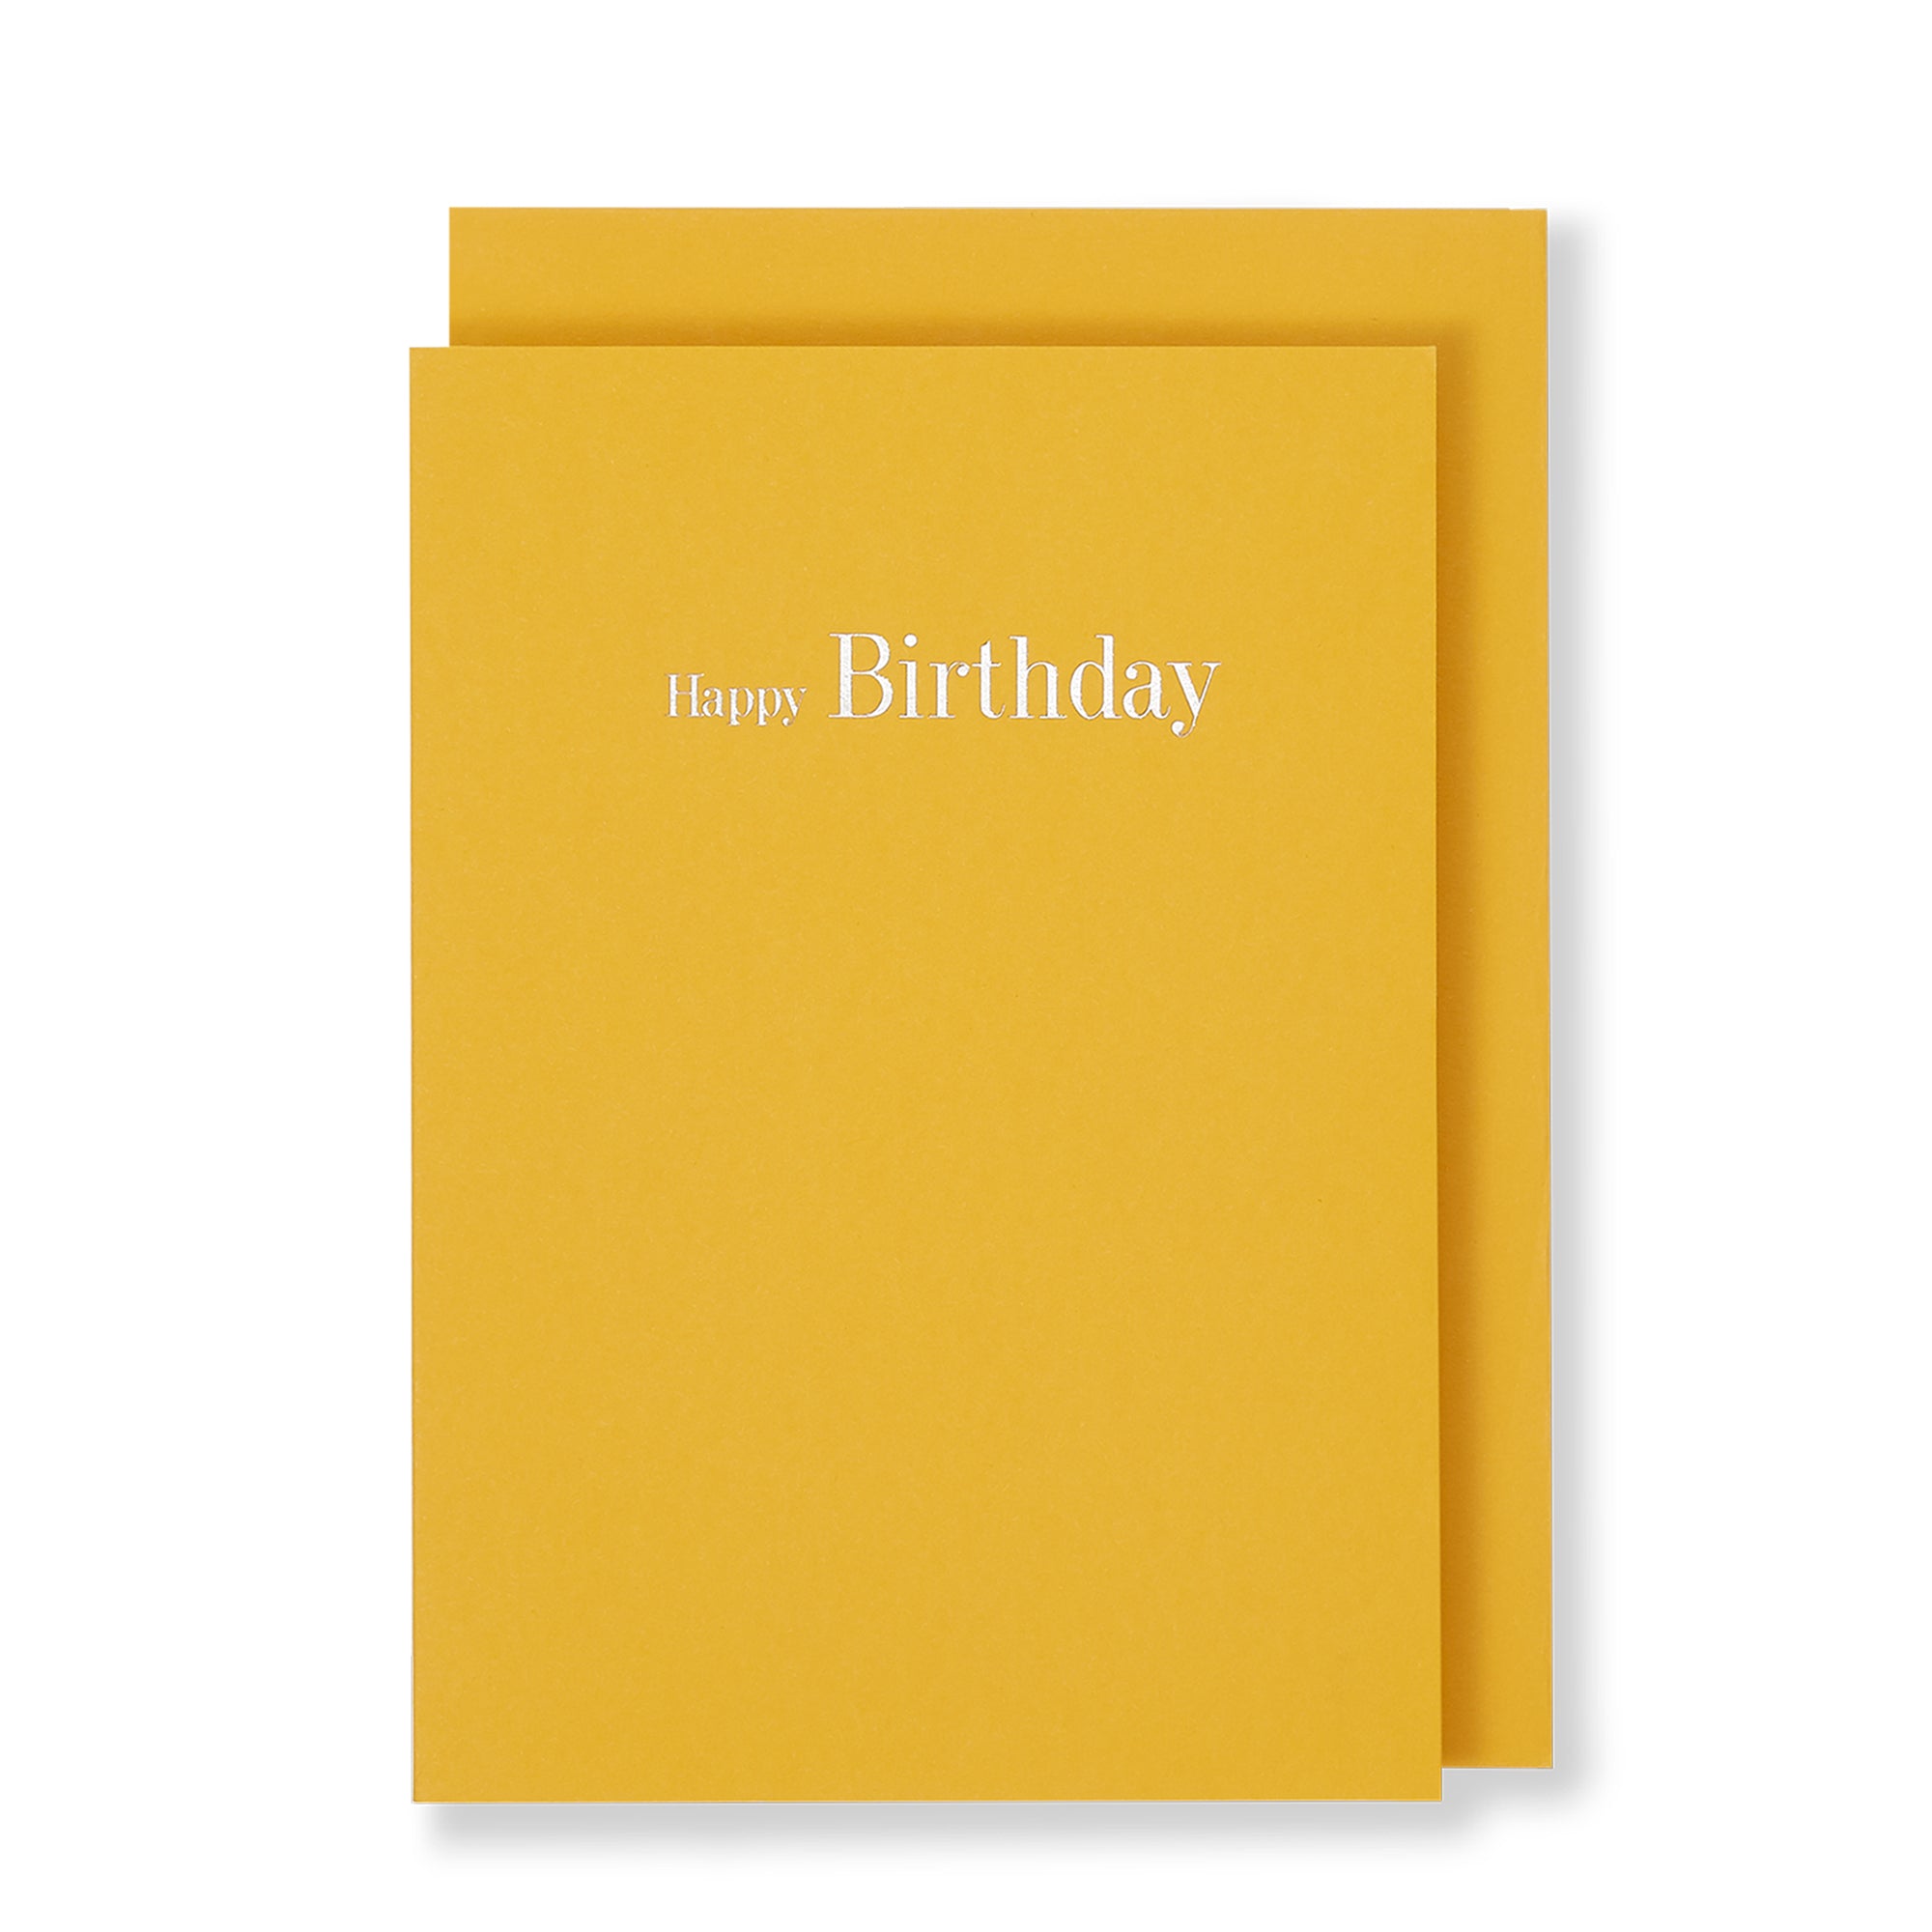 Happy Birthday Greeting Card in Orange Front